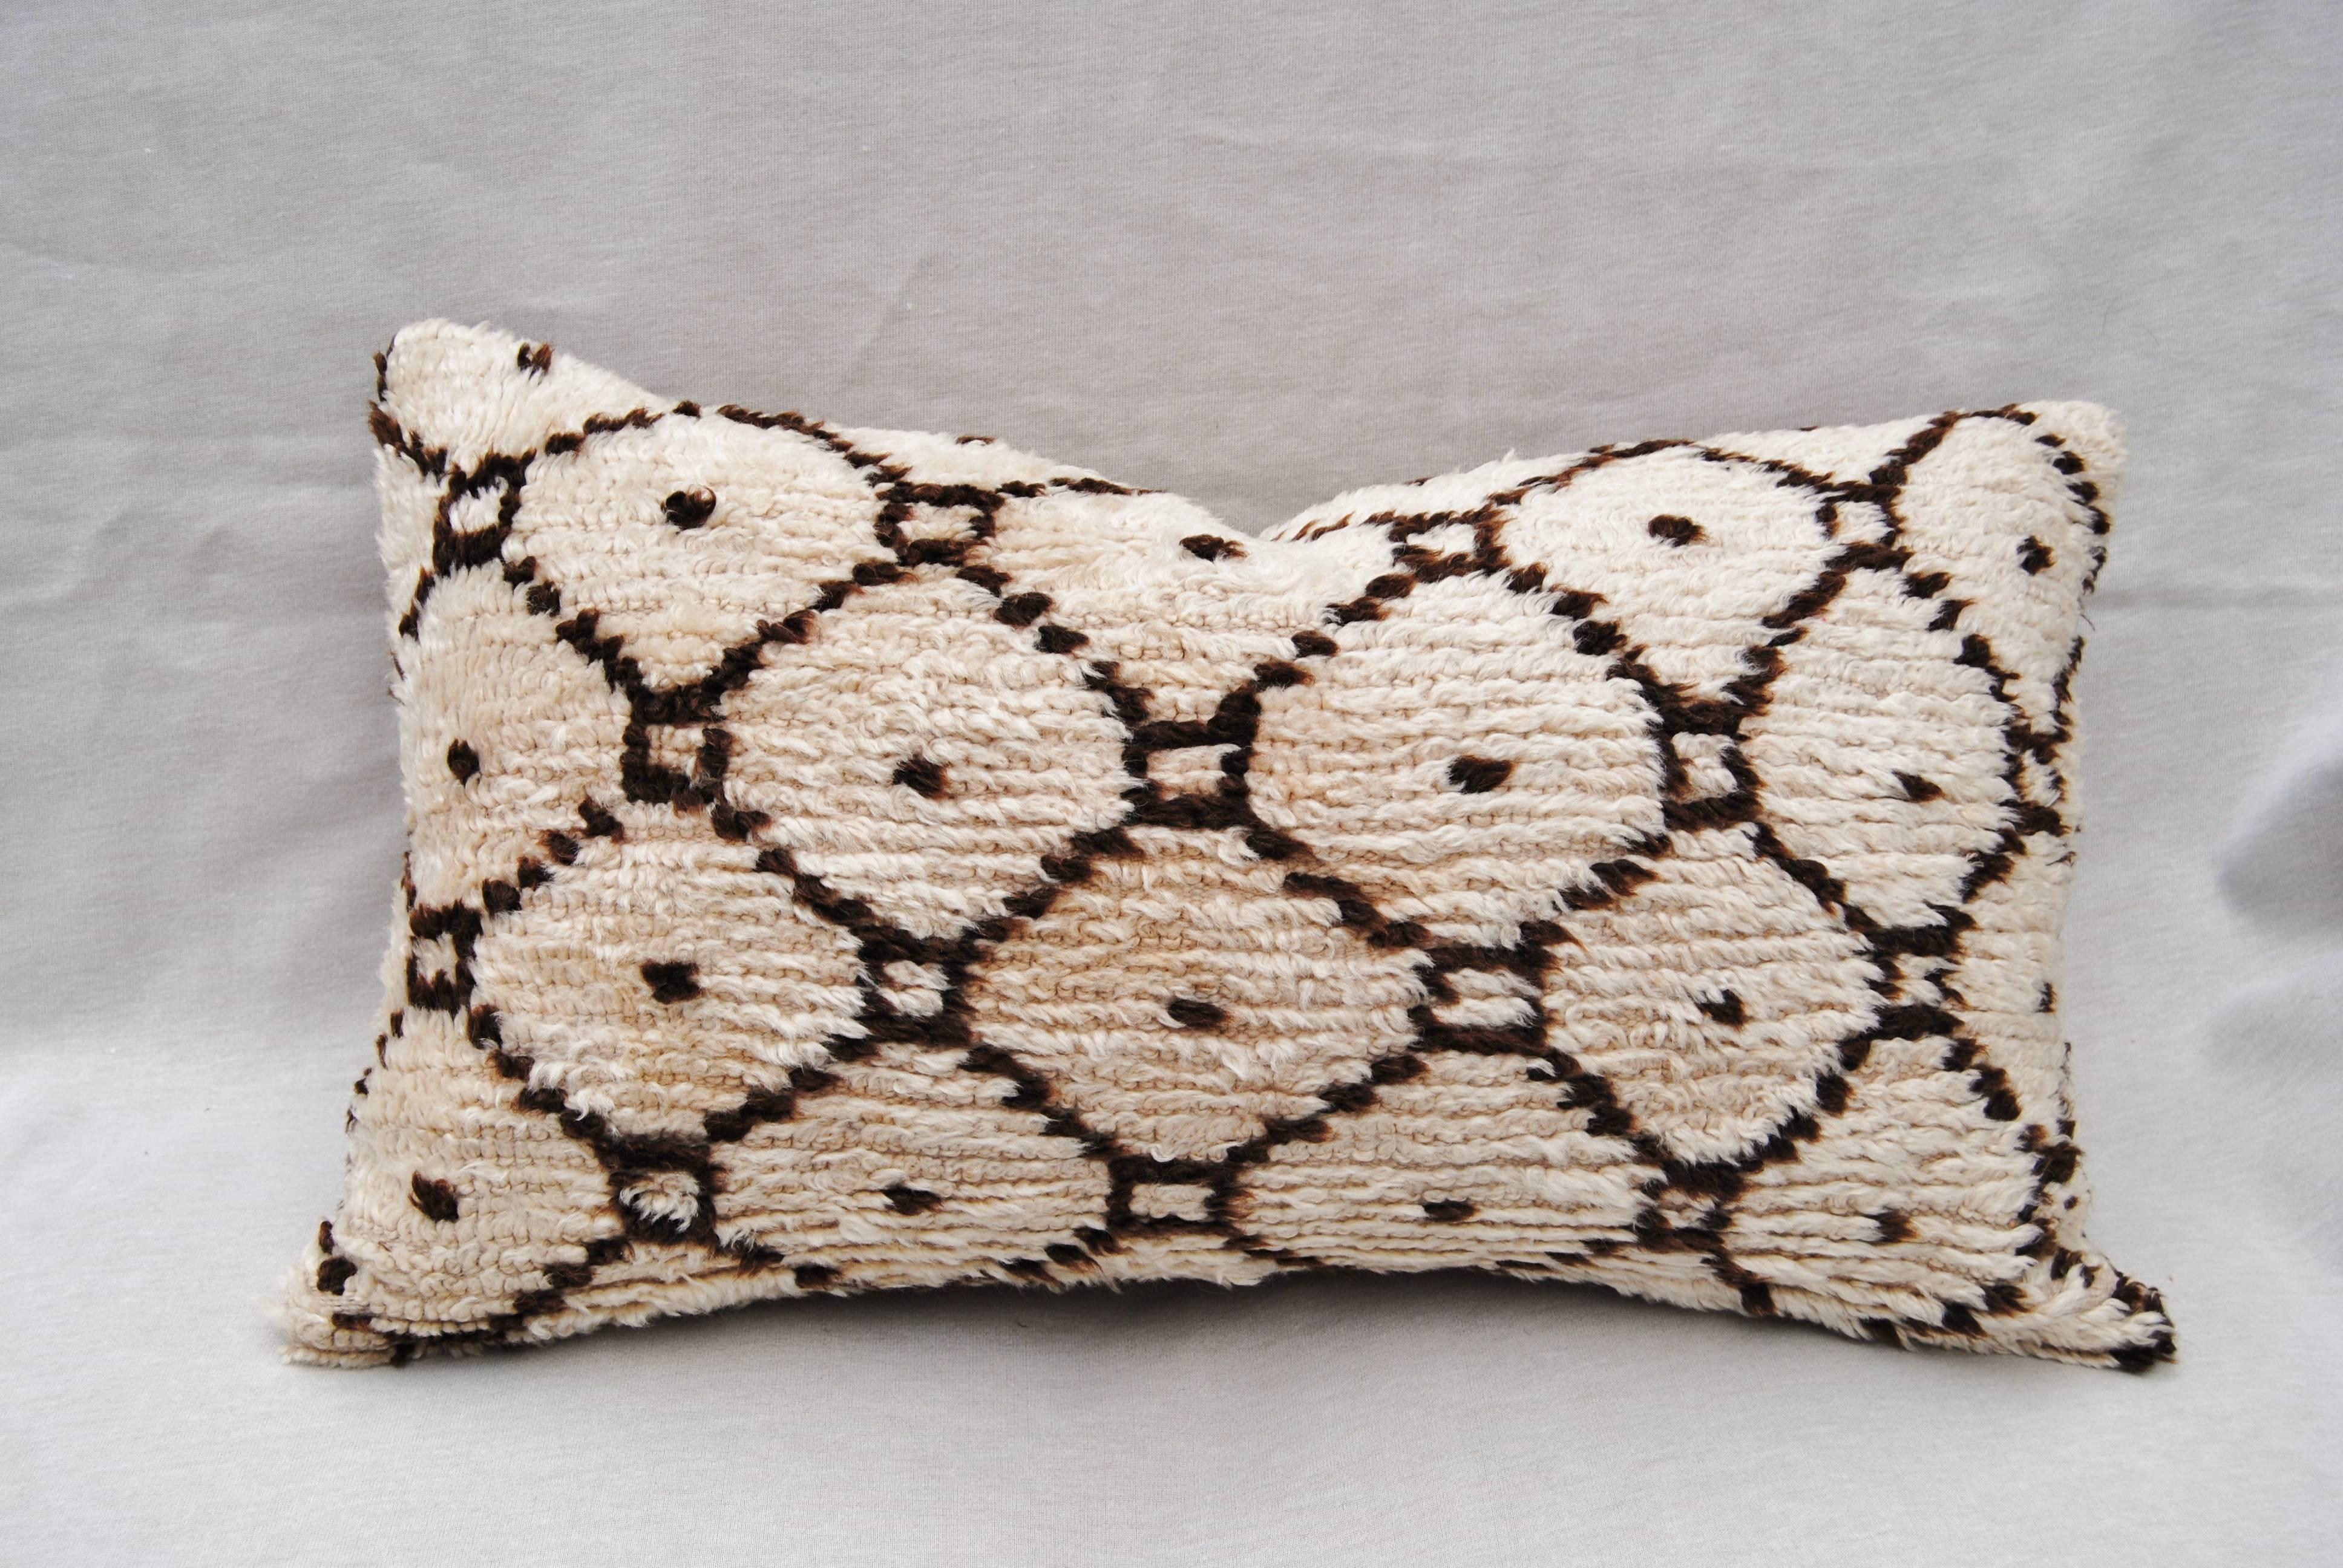 Vintage Hand-Loomed Wool Moroccan Beni Ouarian Pillow, Cream and Brown 1